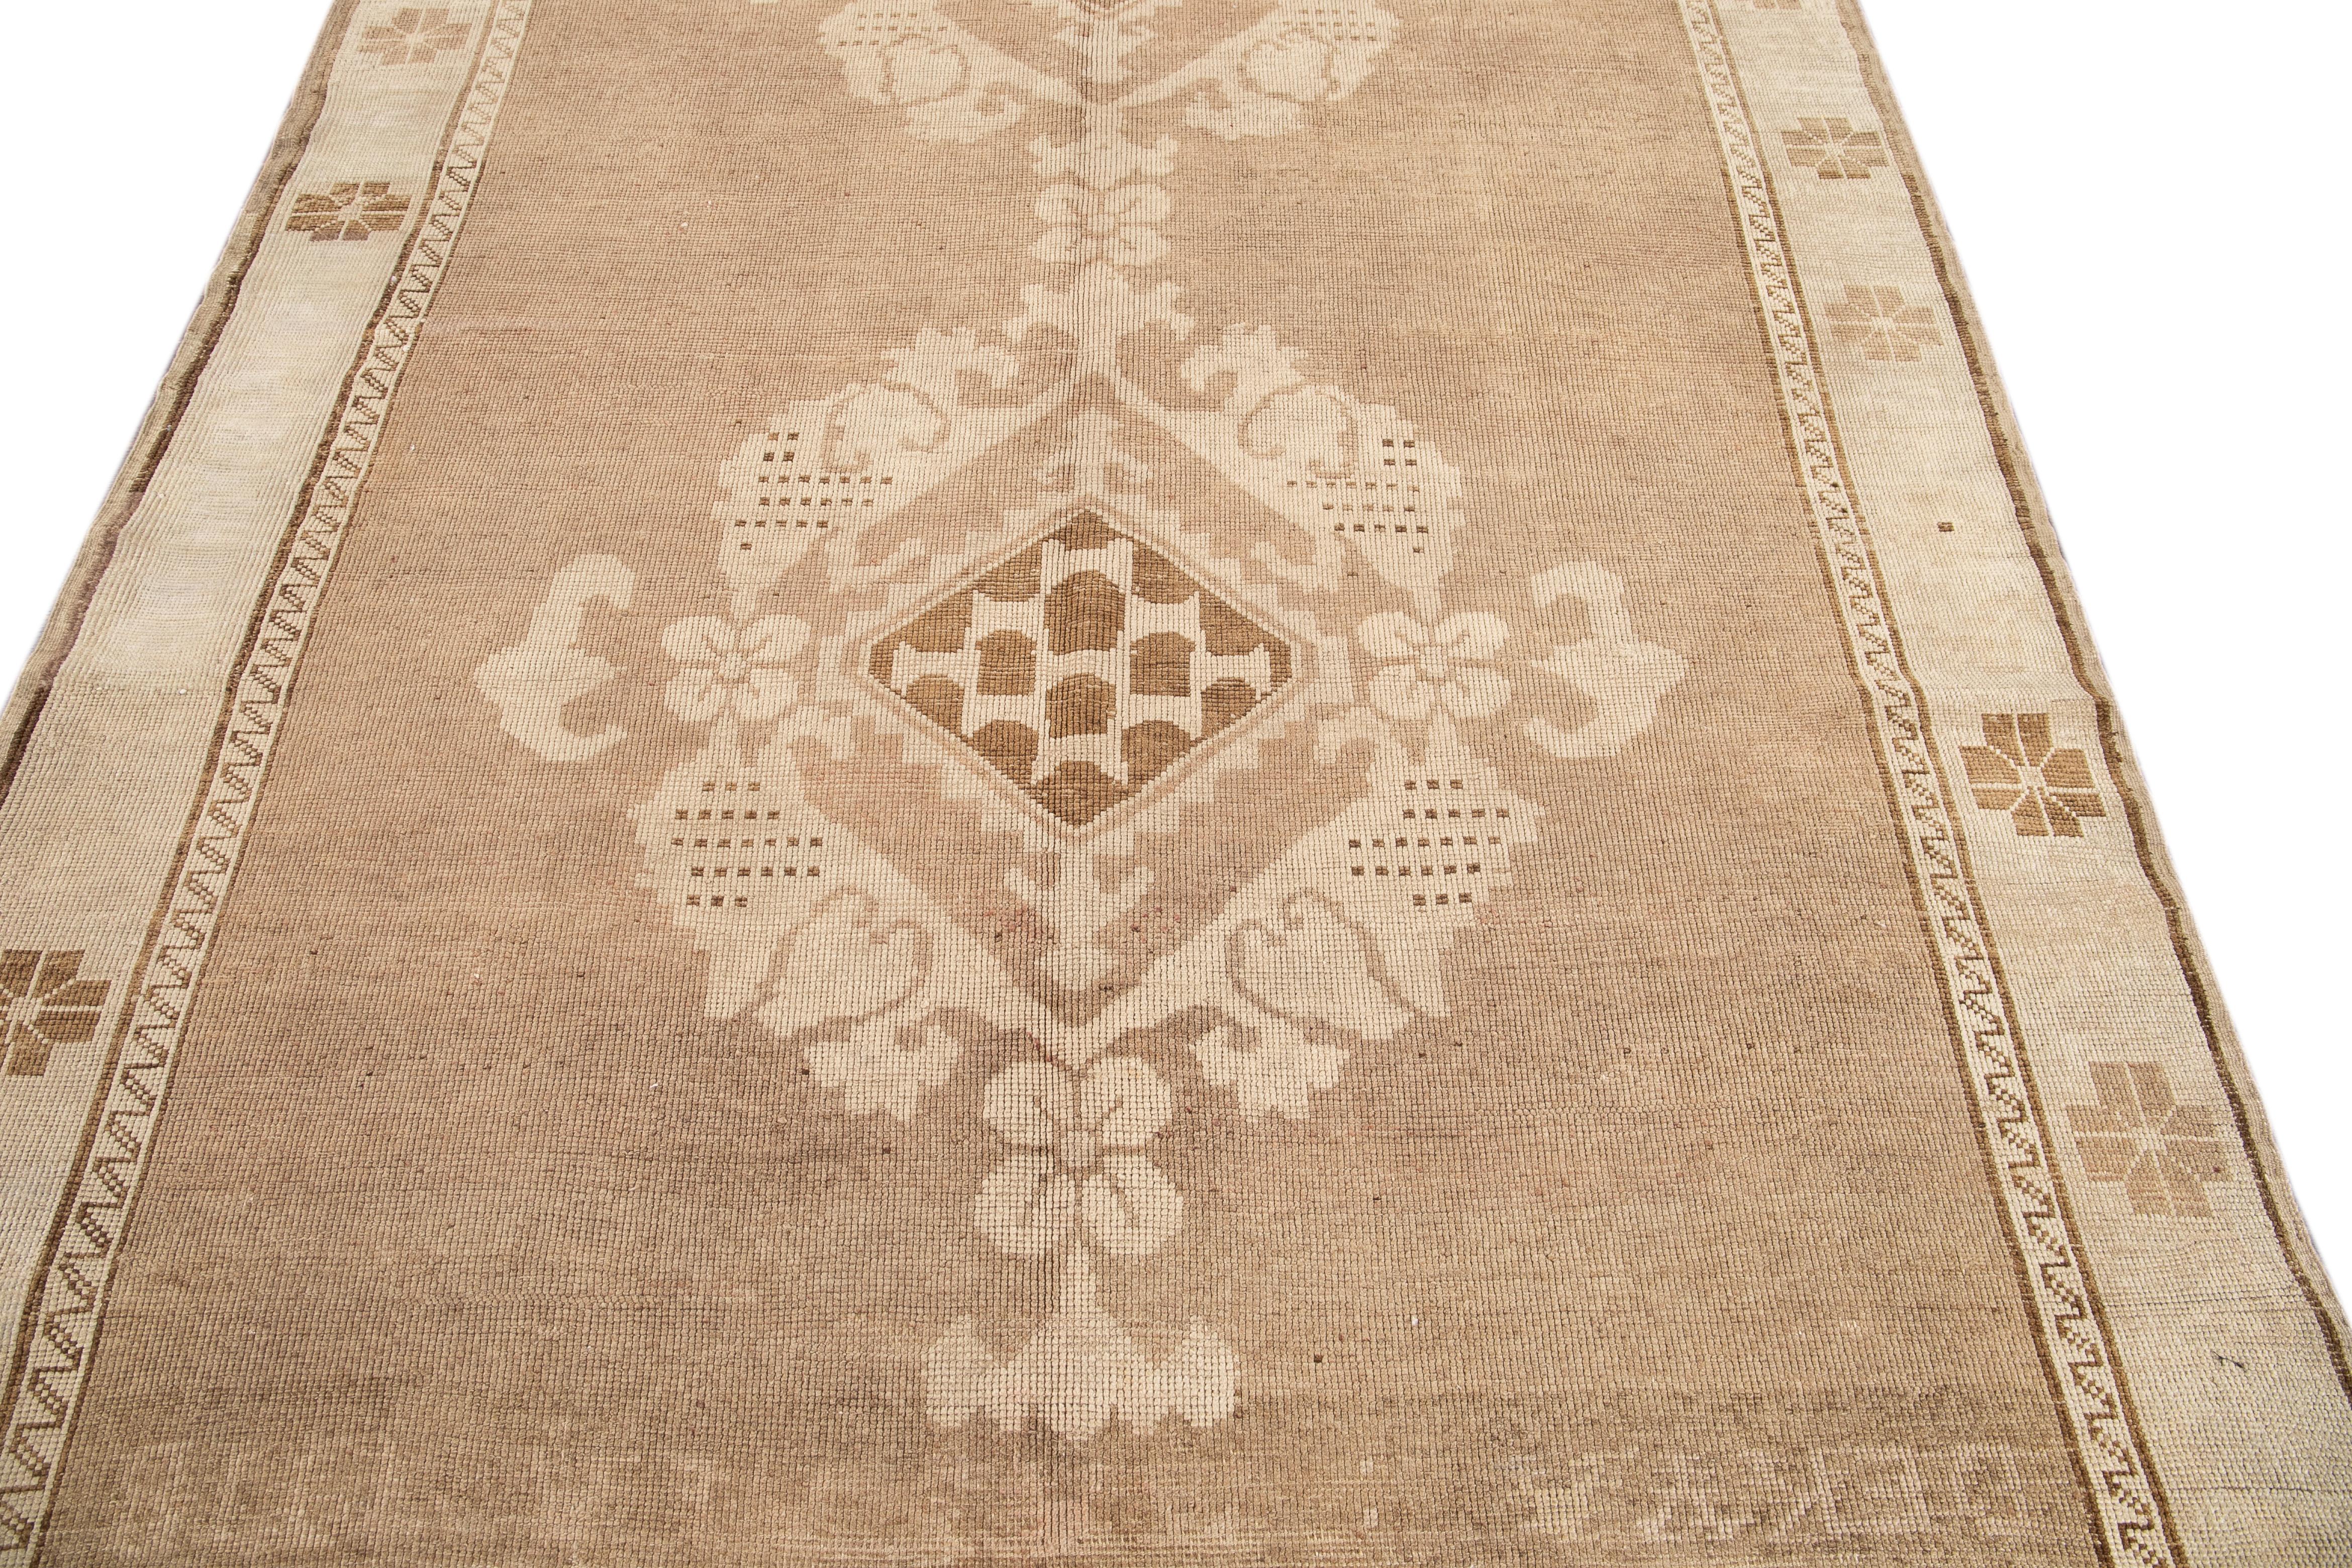 An Antique Khotan rug crafted from hand-knotted wool with an exquisite tan field, adorned with intricate ivory and brown accents in a dual medallion design spanning its entirety. This stunning piece is estimated to date back to the early